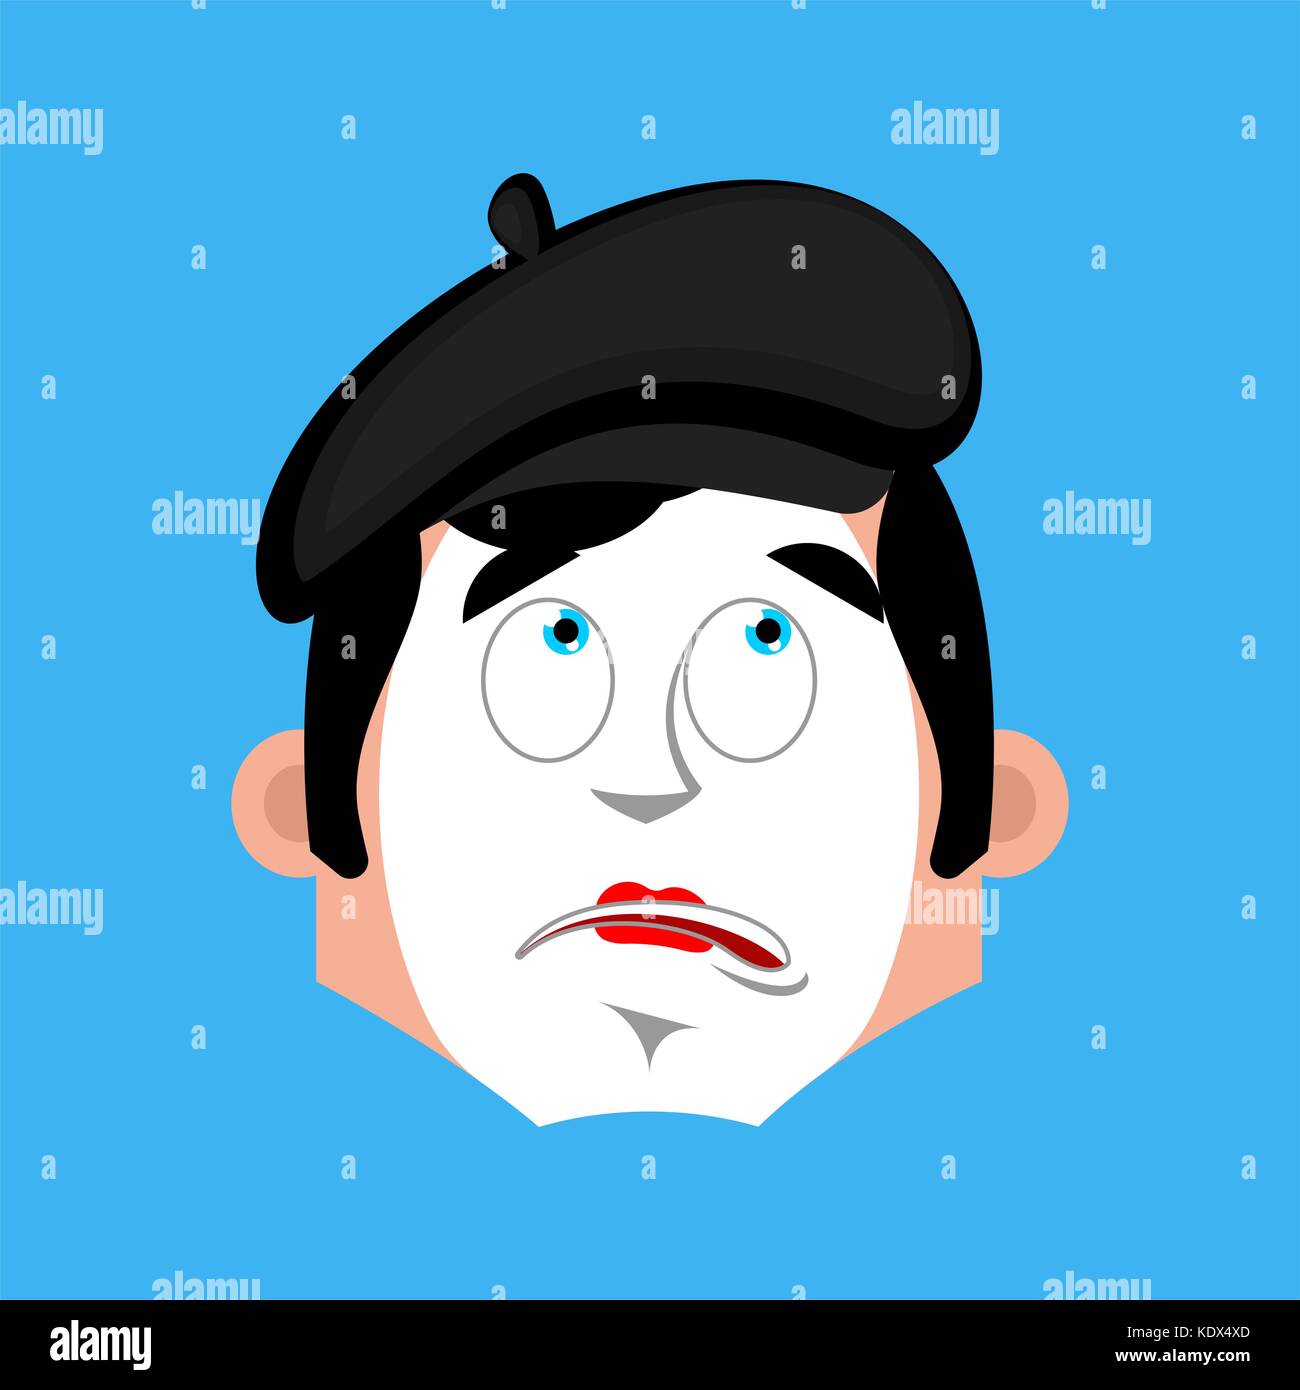 Mime bewildered emotion avatar. pantomime at a loss emoji. mimic icon. Vector illustration Stock Vector